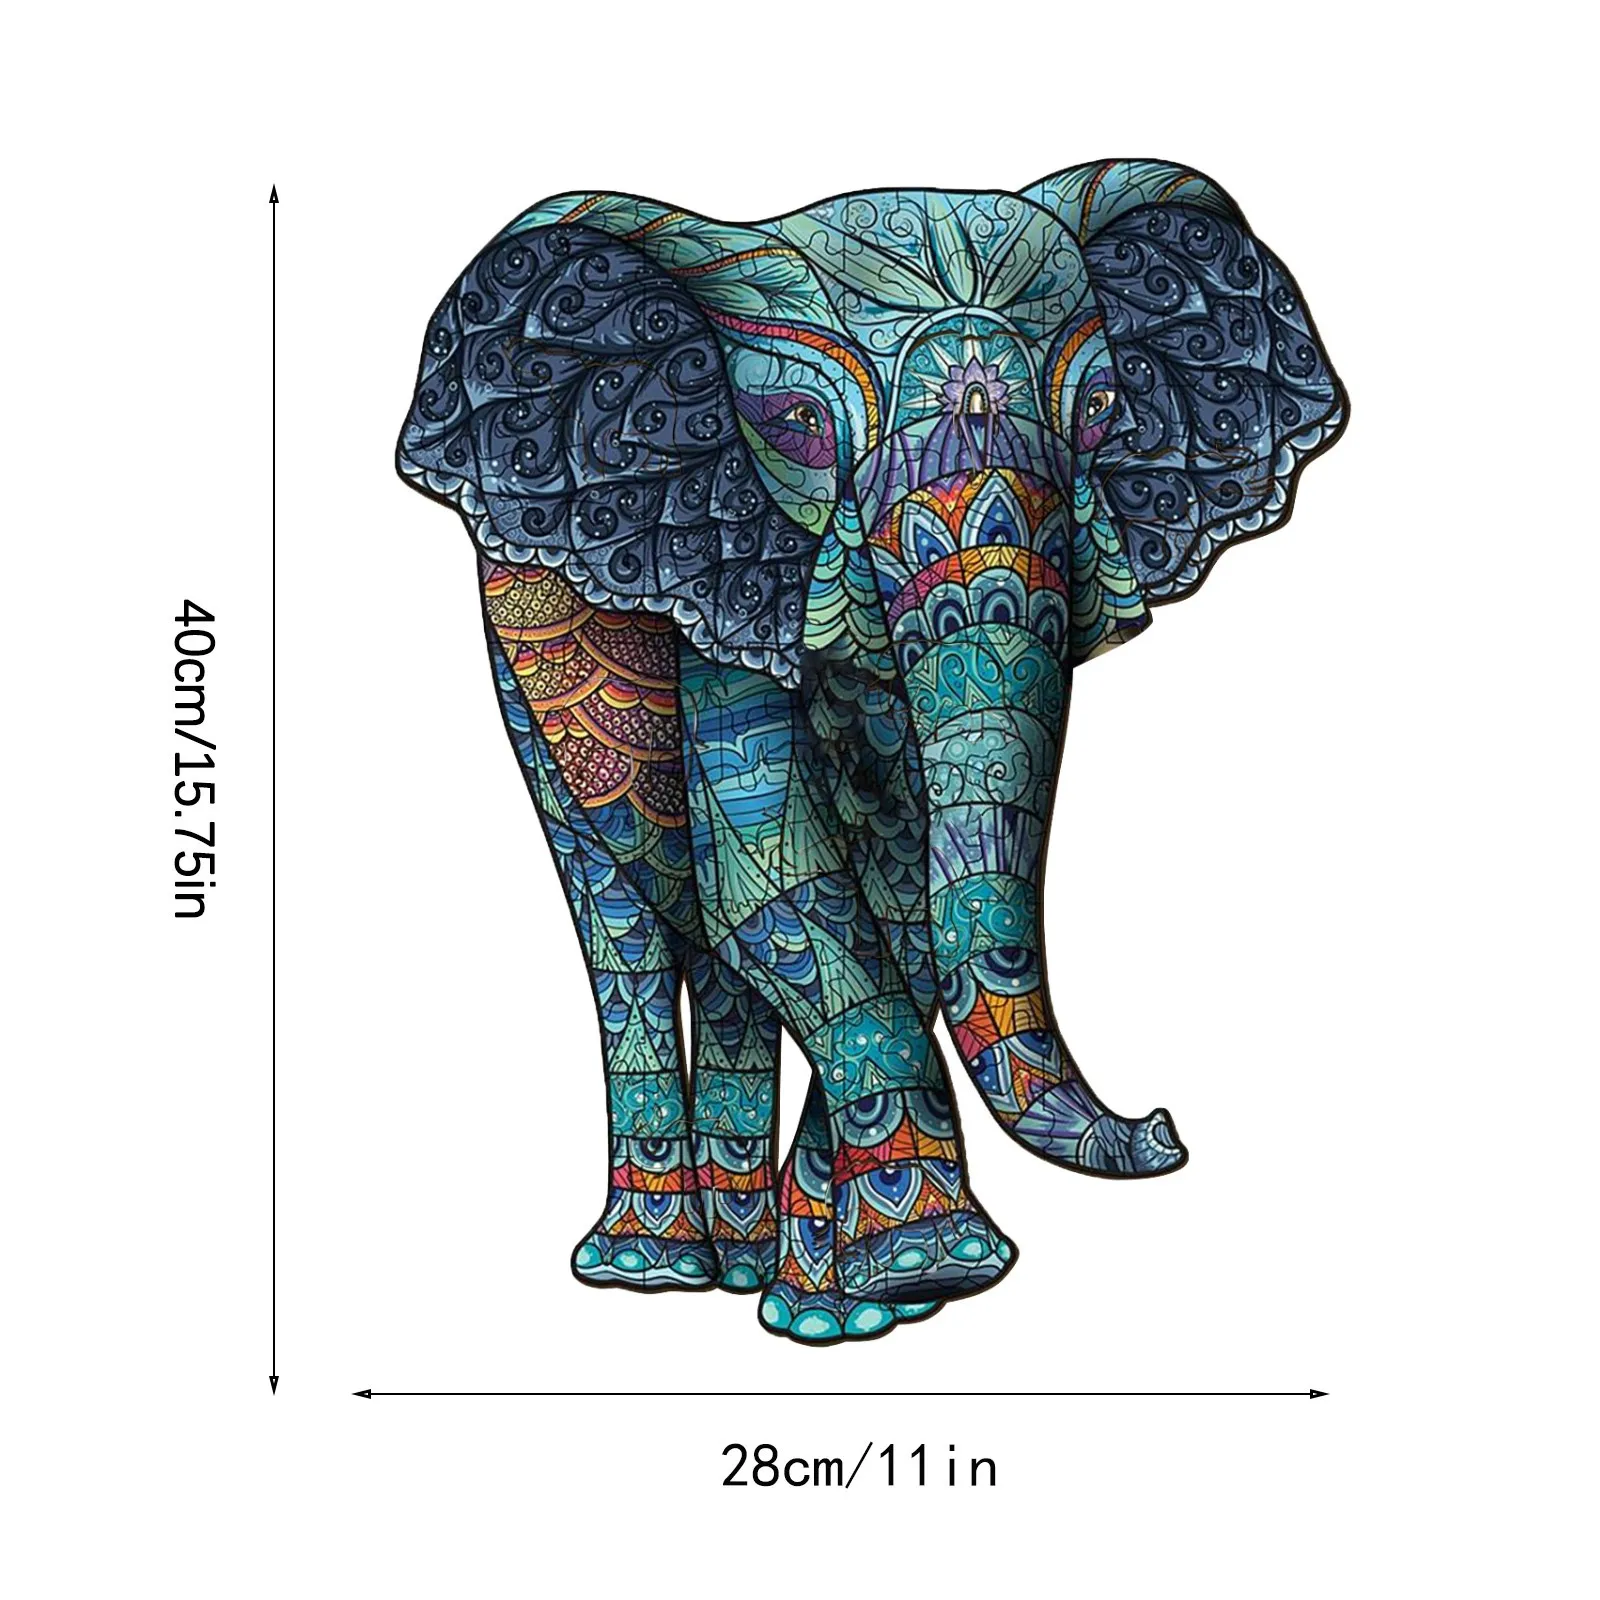 

105/106pcs Elephant Tribal Wooden Puzzle Unique Shape Pieces Animal for Adults and Kids Montessori Jigsaw Fidget toys Gift